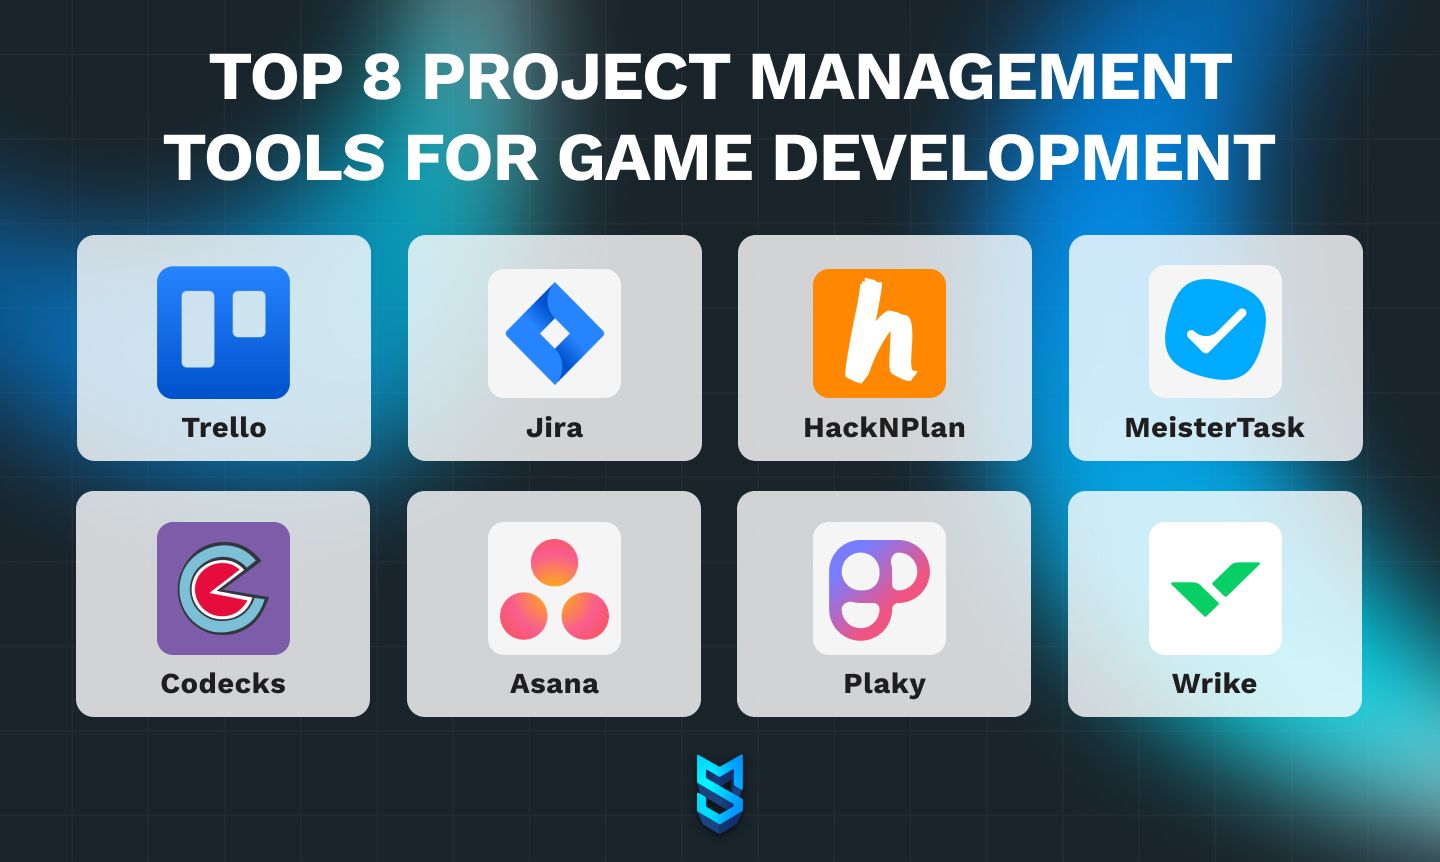 Top 8 project management tools for game development